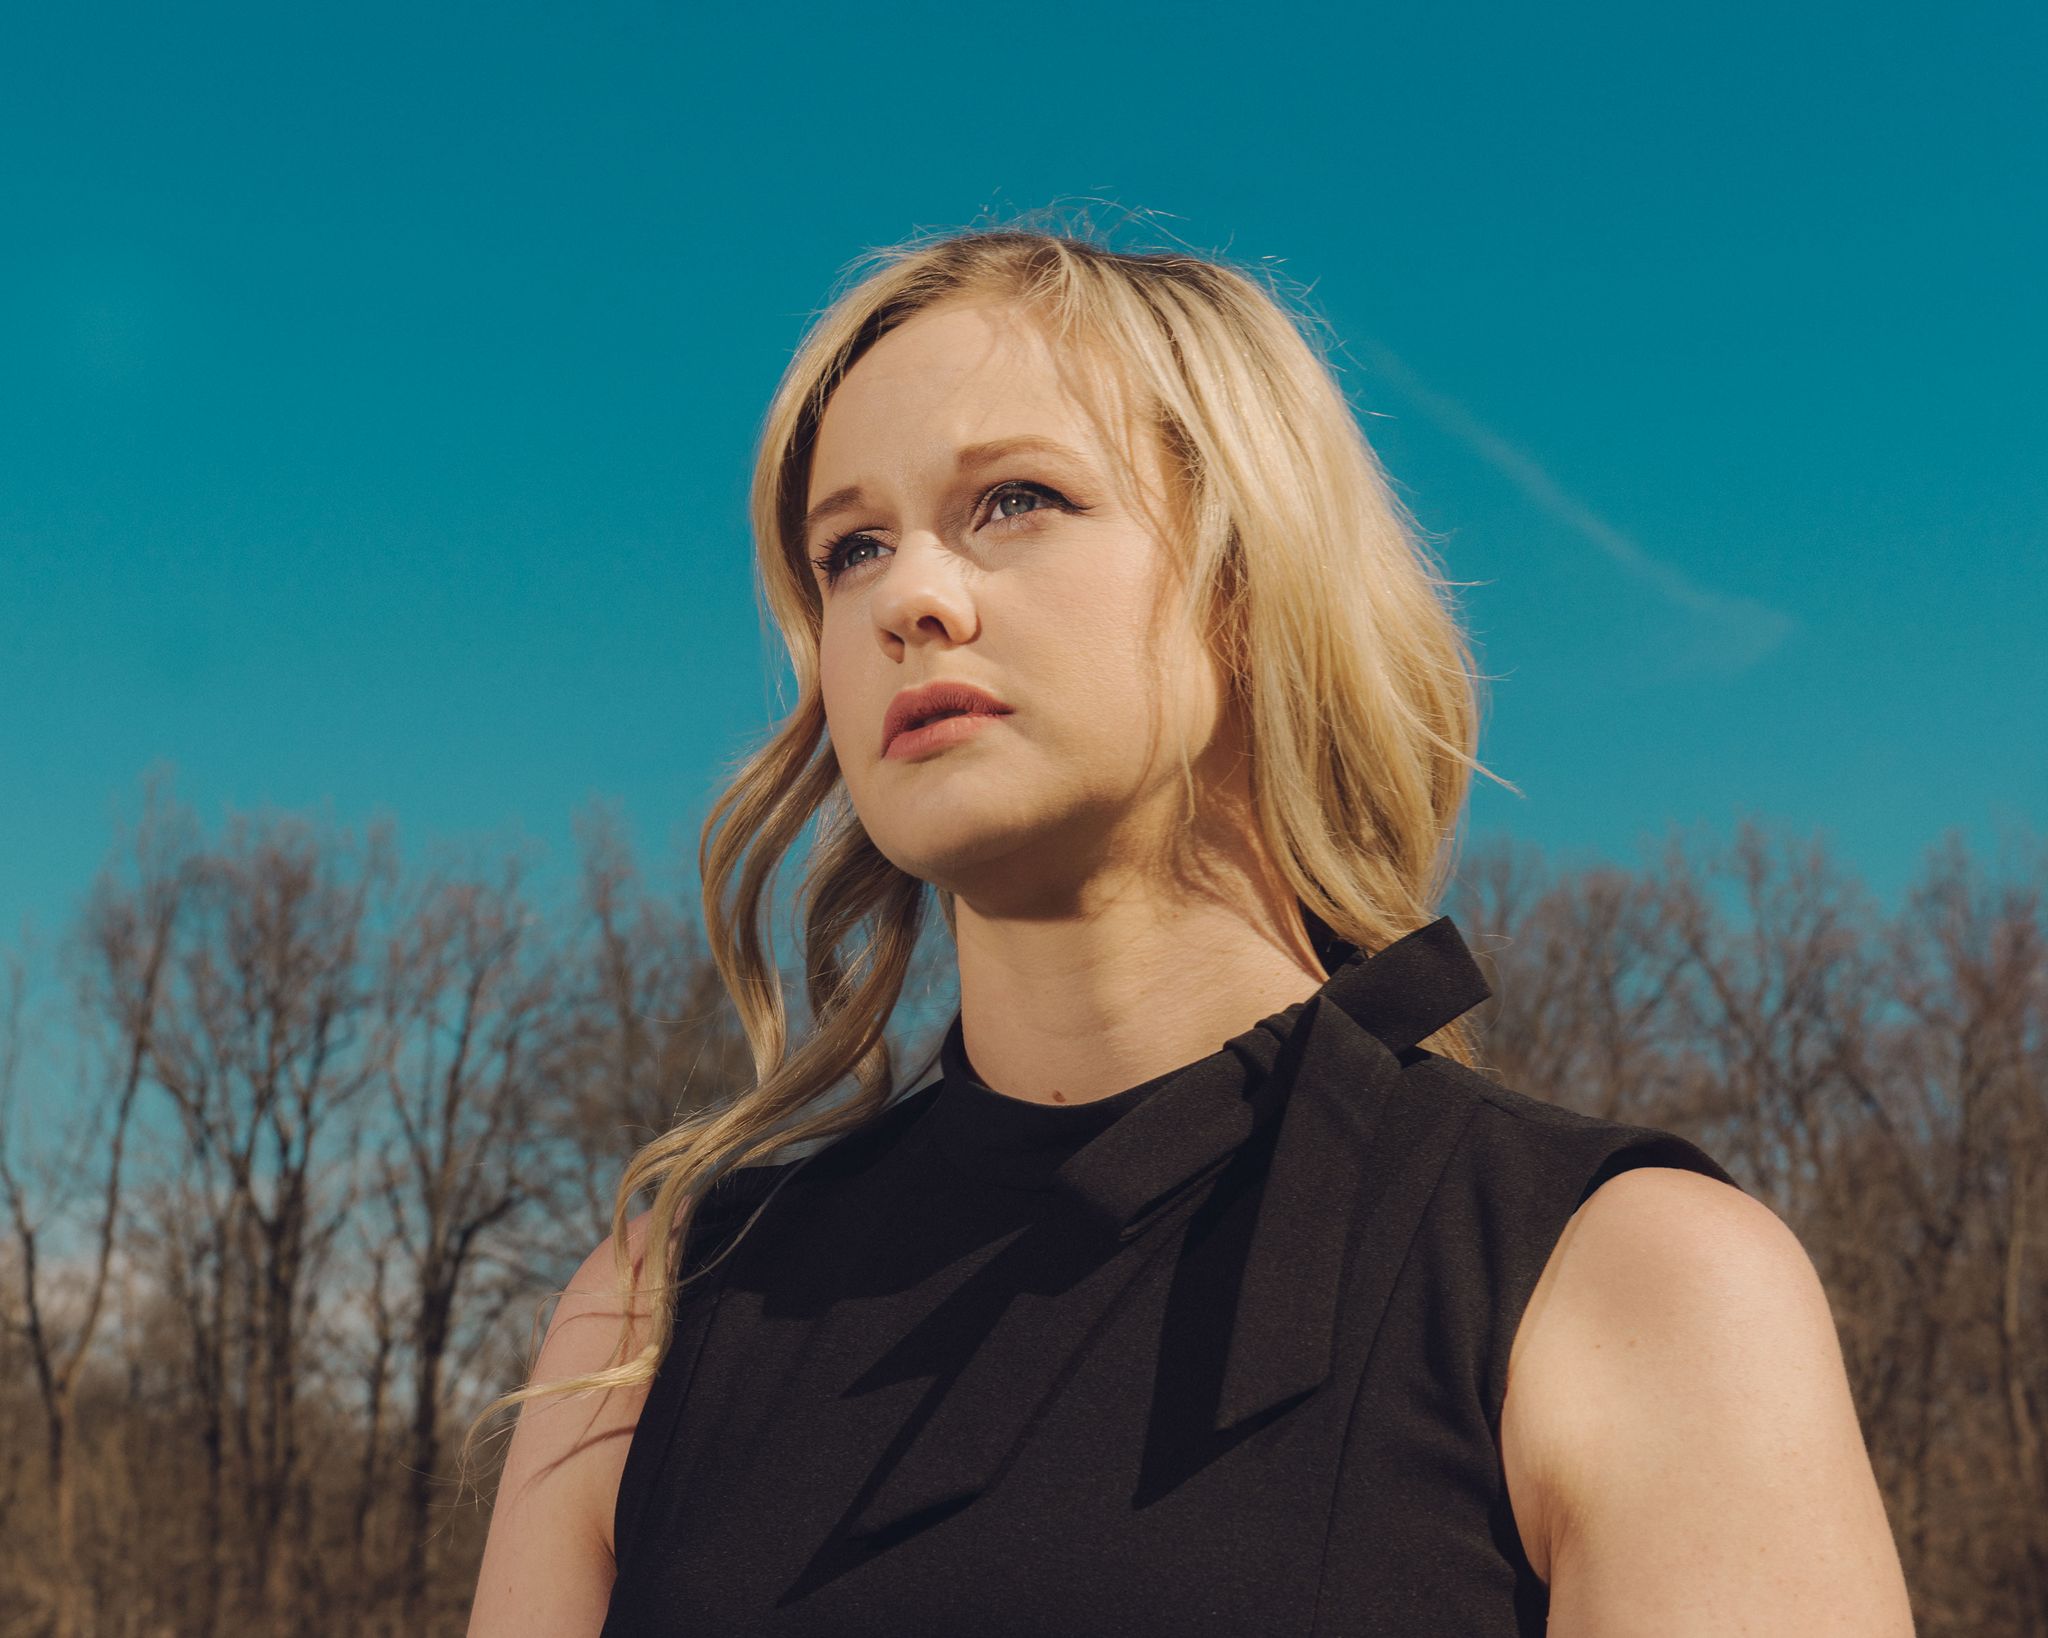 rebekah jones, unsmiling, wearing a black sleeveless dress with a small bow at the collar, standing in front of a clear blue sky and a line of trees with bare branches, looking to her right